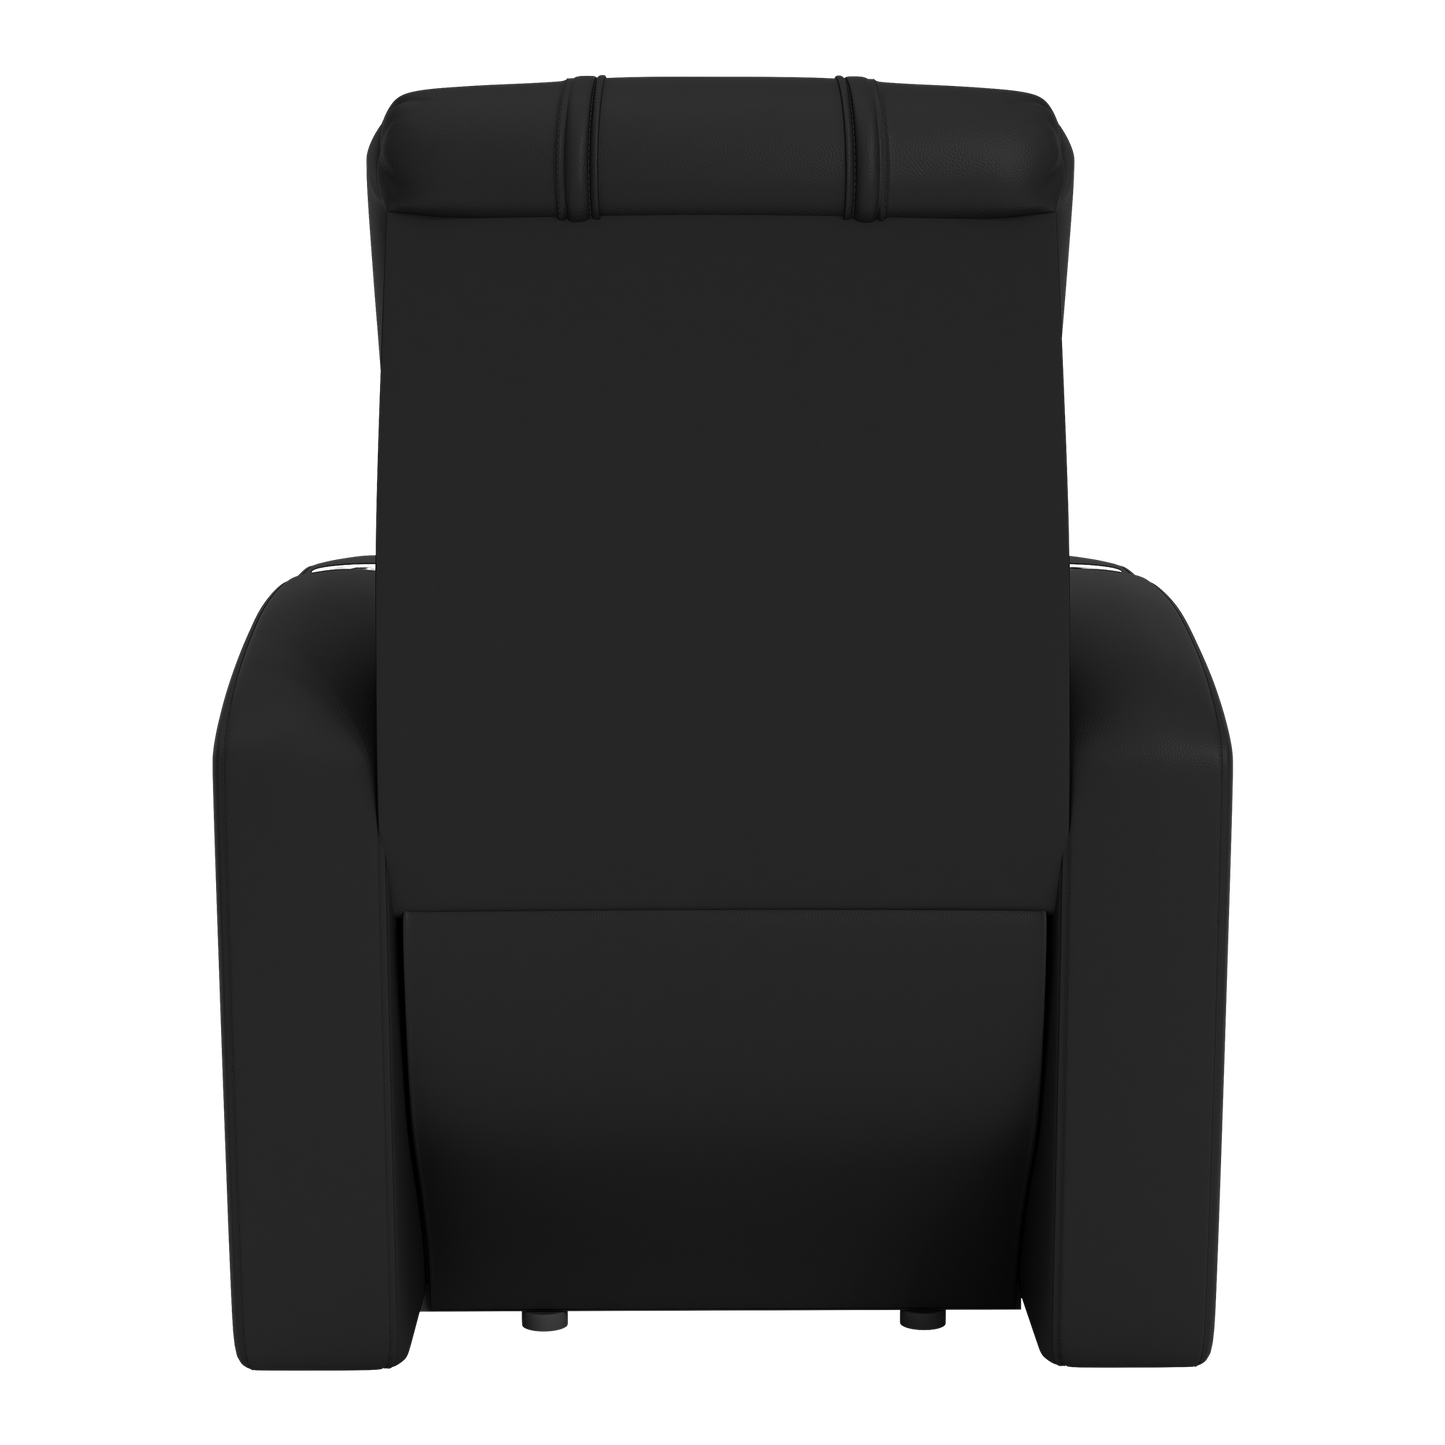 Stealth Recliner with  Chicago Bears Helmet Logo